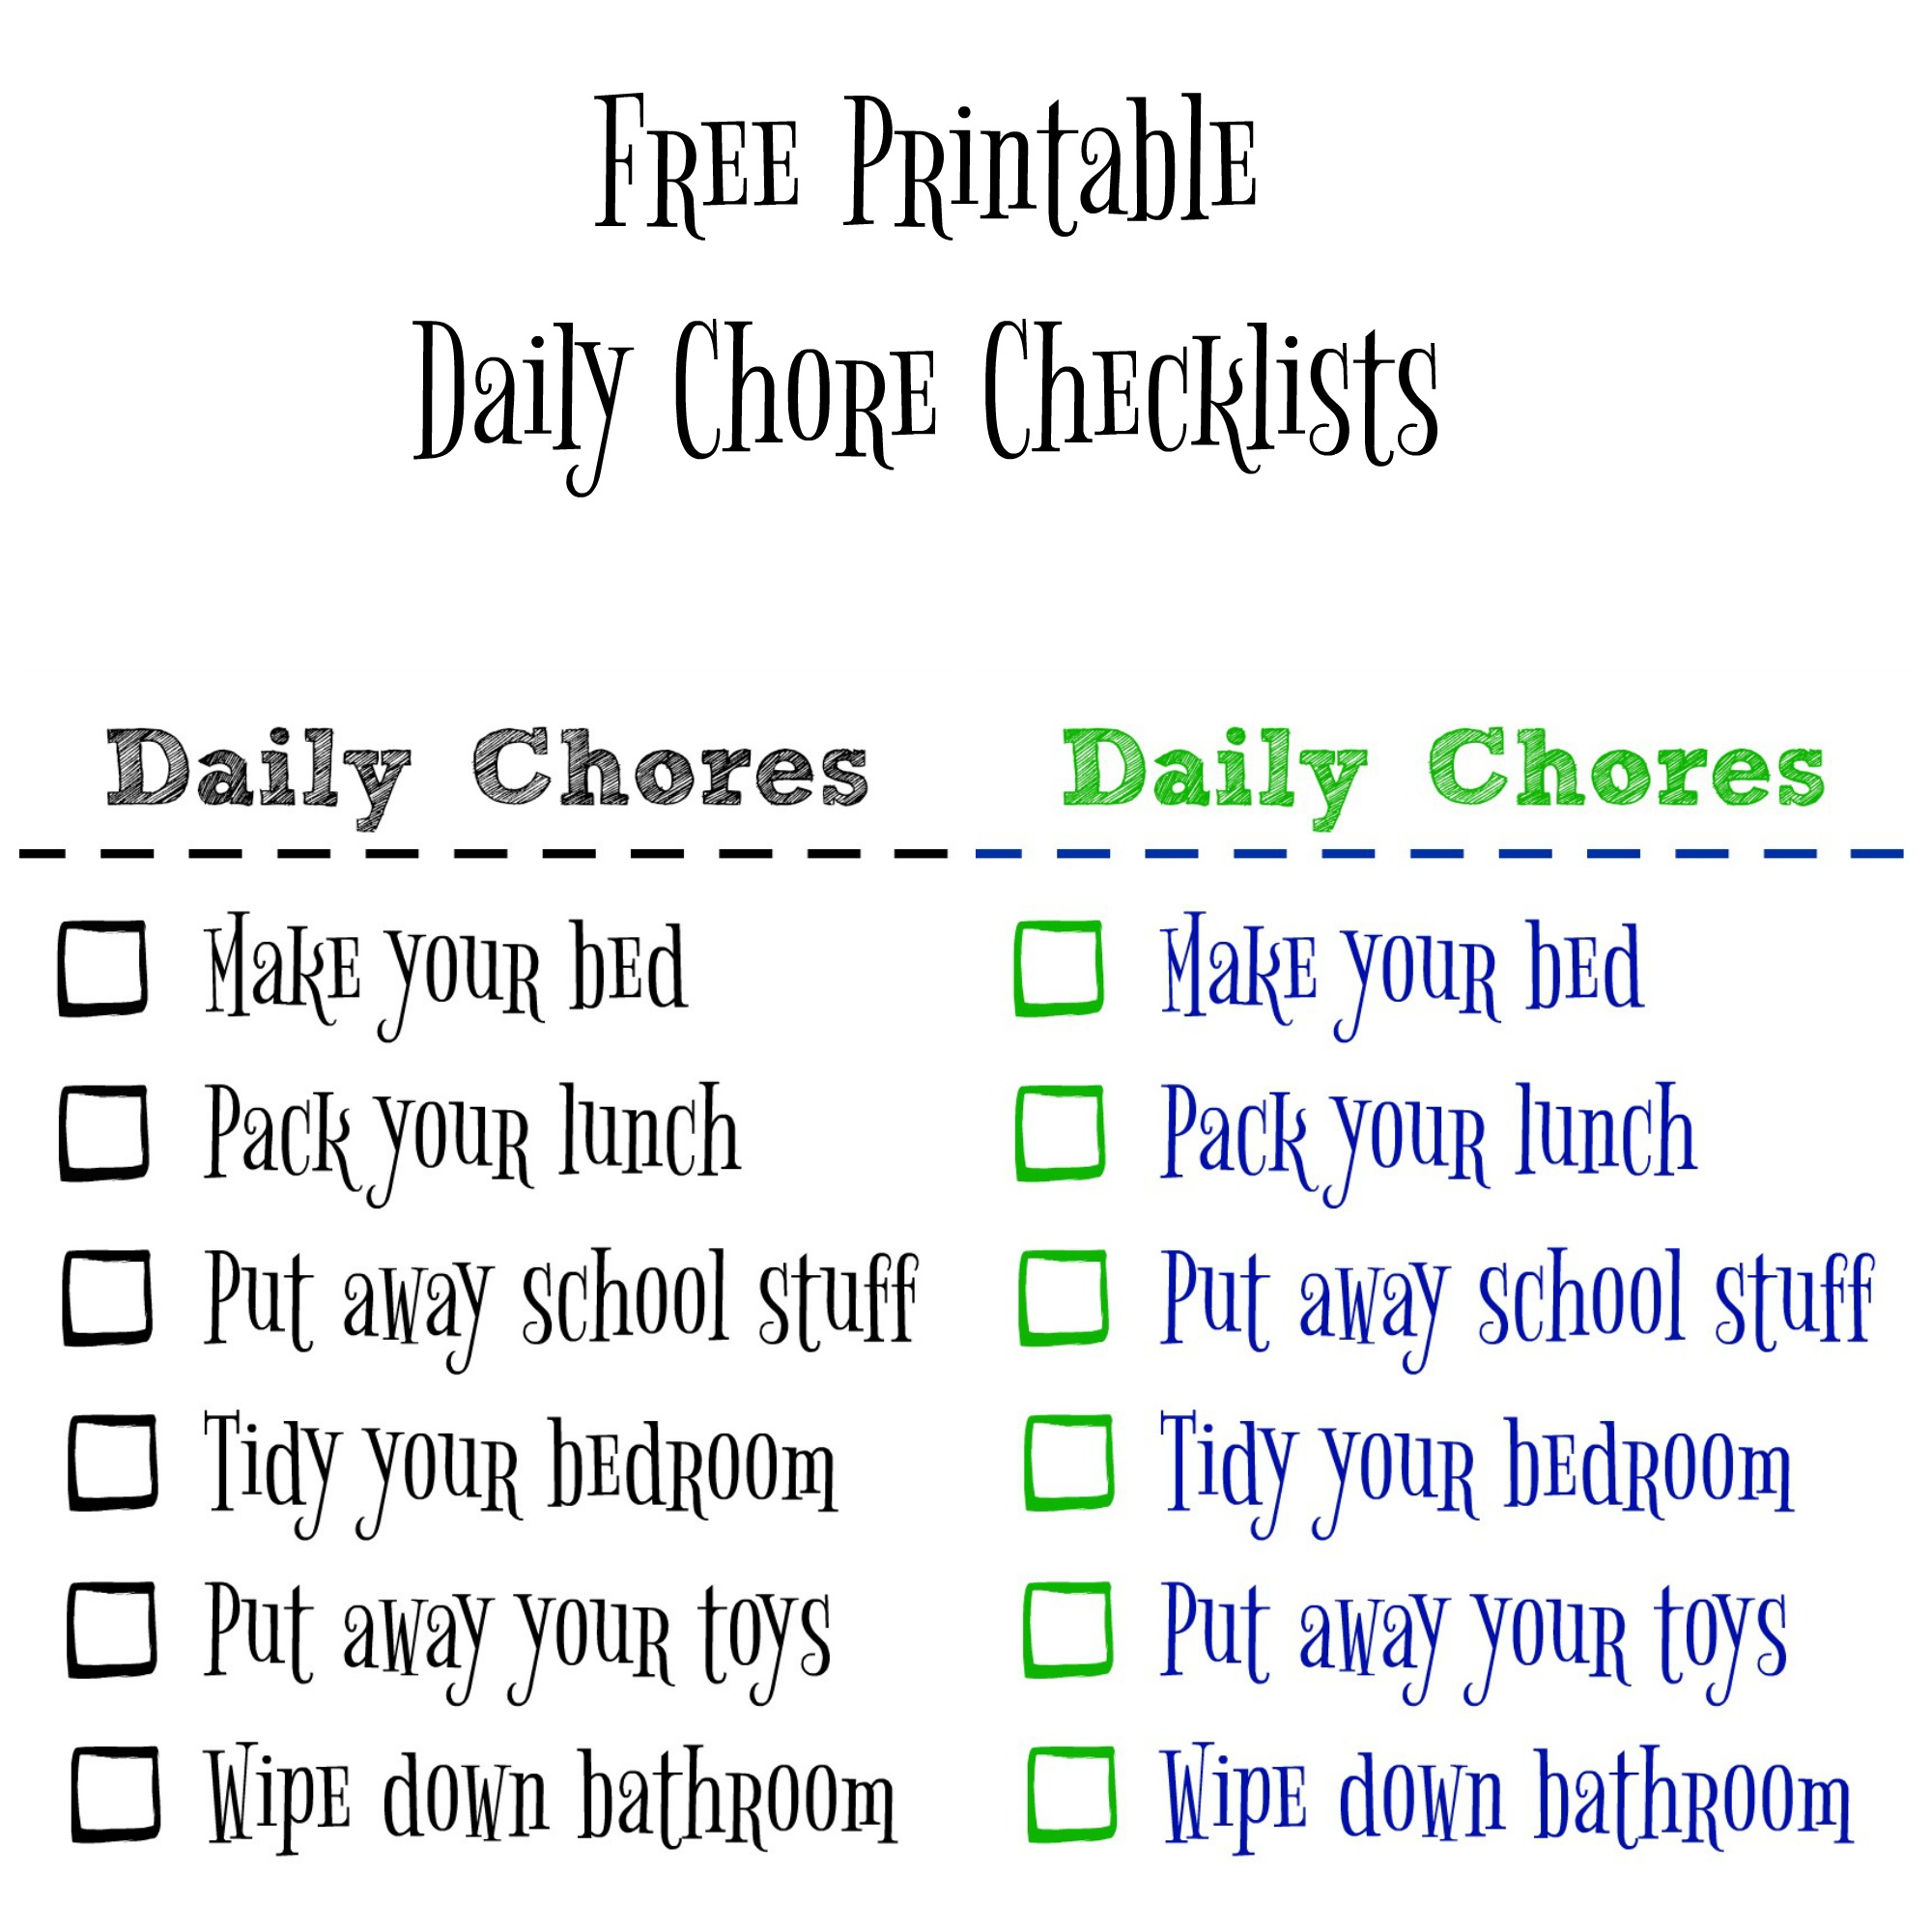 to-do-list-for-home-chores-chores-daily-weekly-chore-list-chart